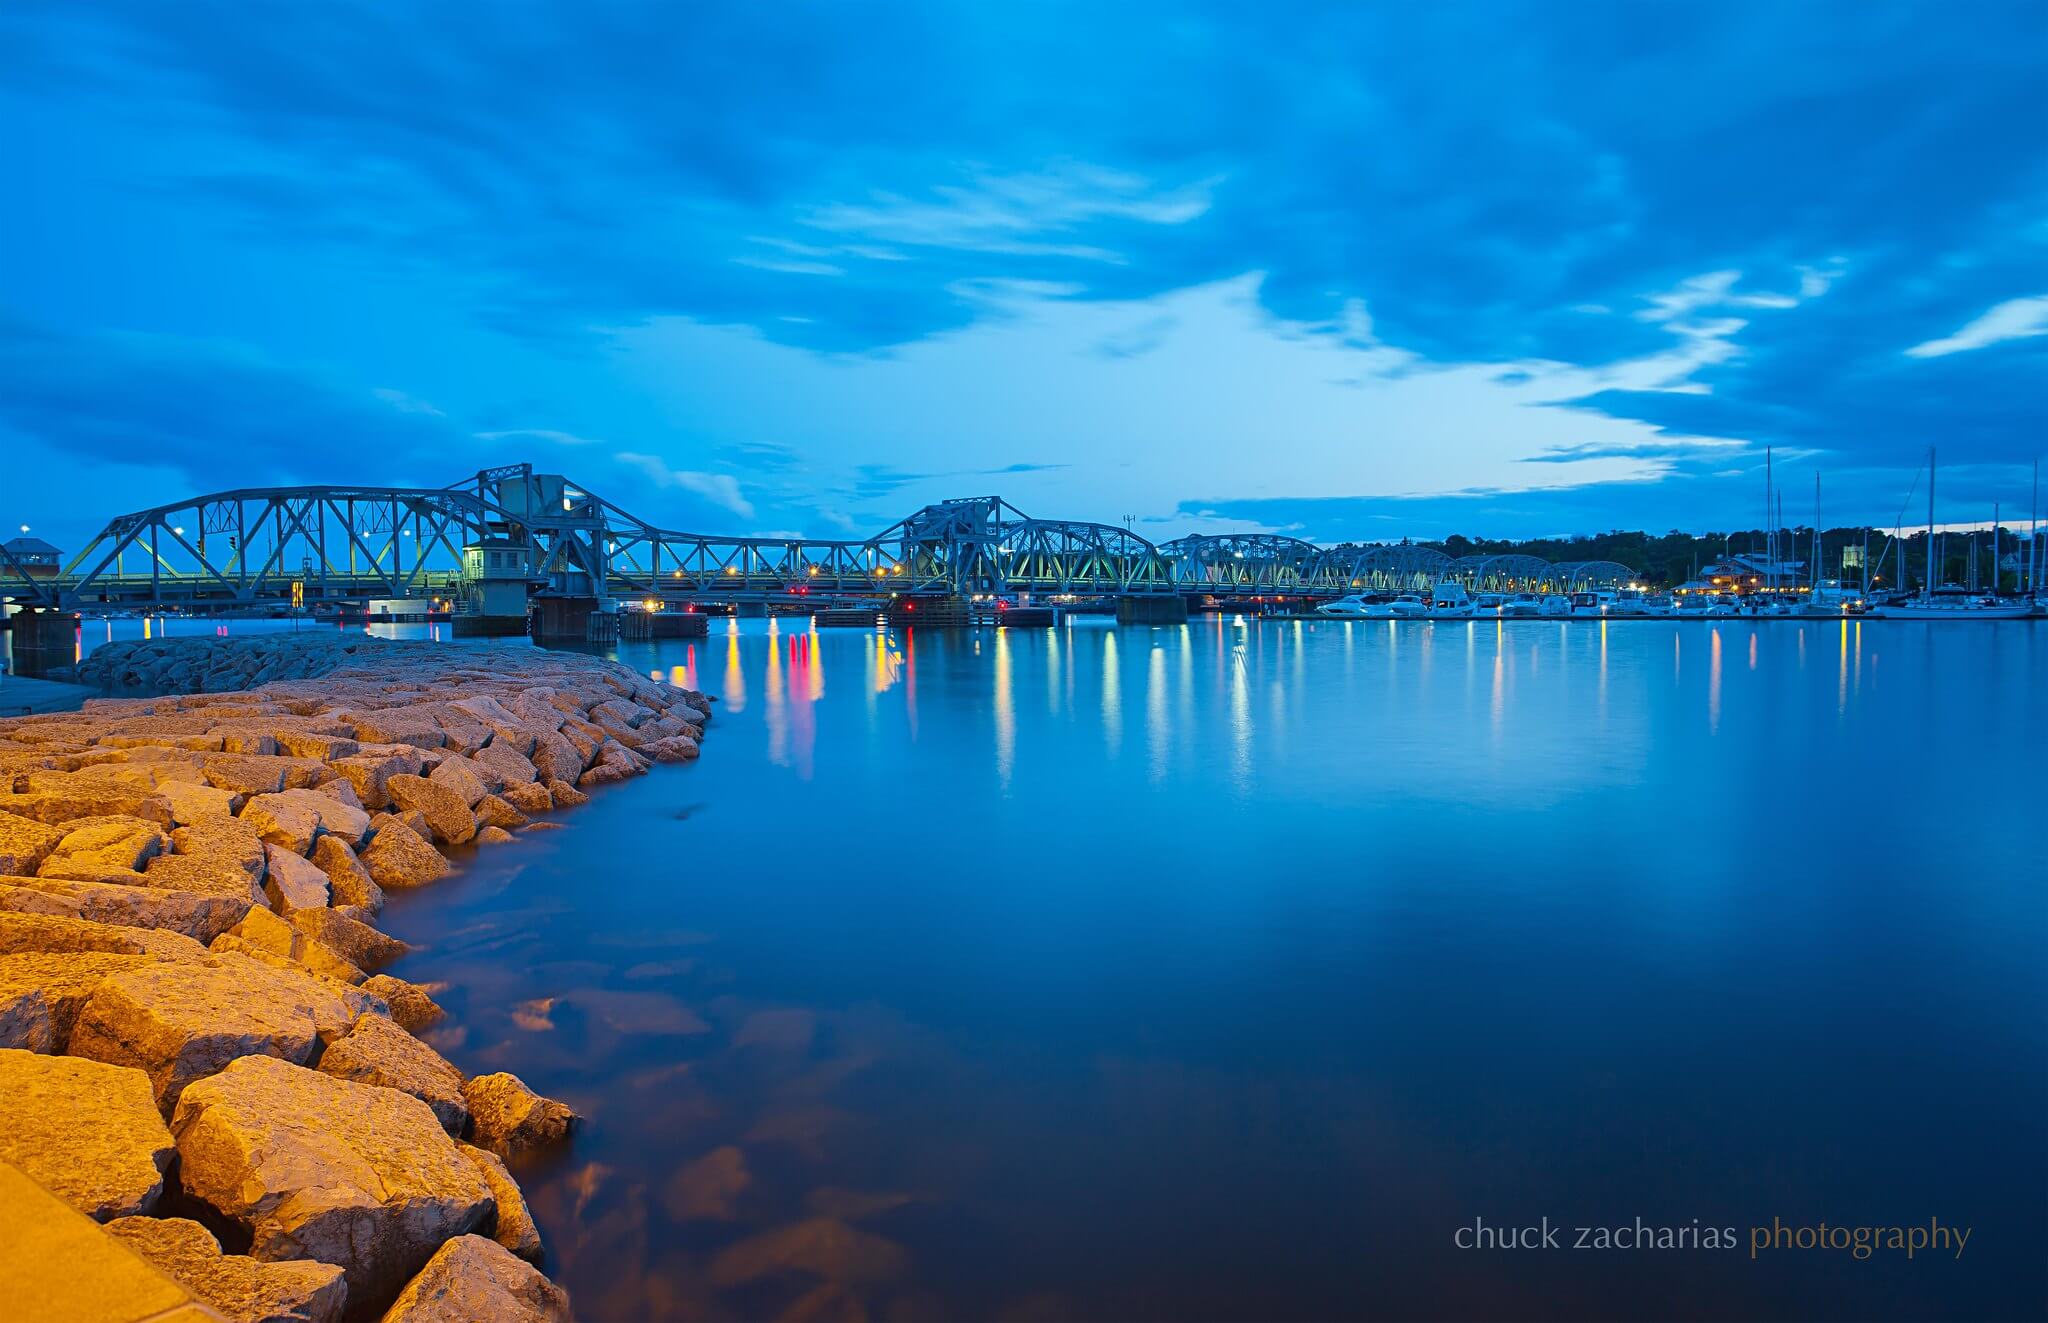 The Sturgeon Bay waterfront at twilight with the rocky shoreline on the left leading into a bridge over the water with anchored boats on the right.